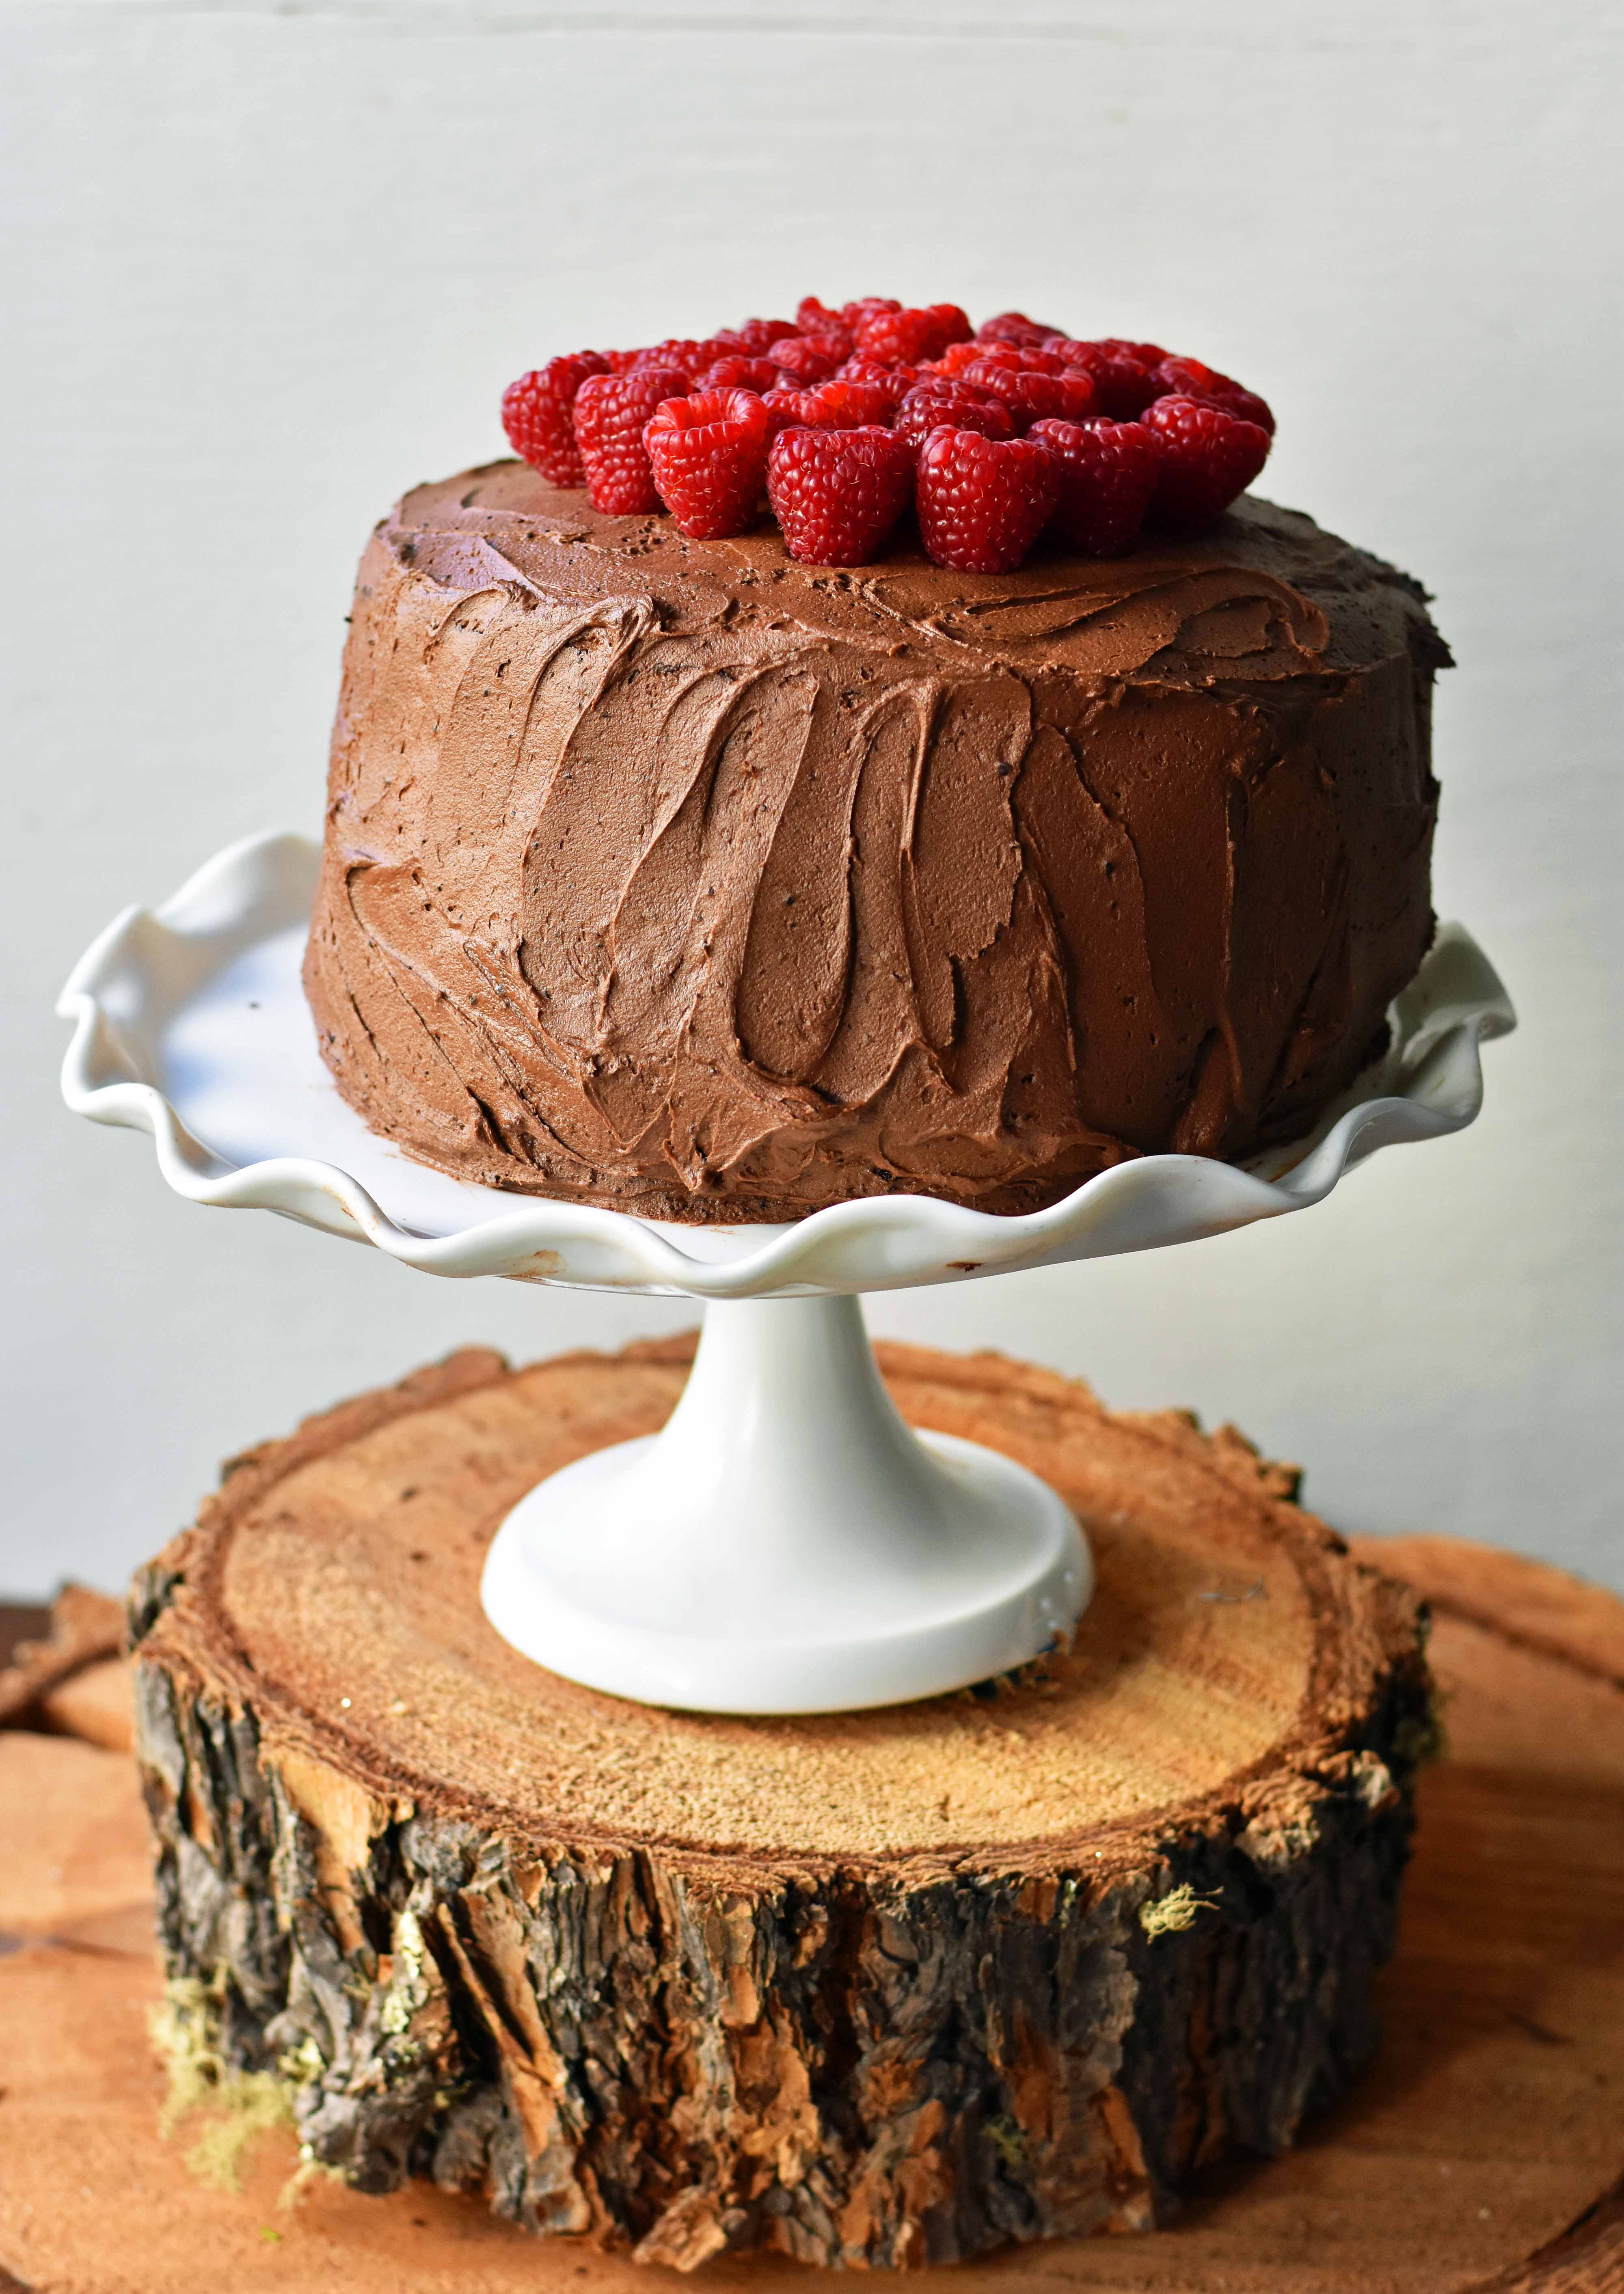 Rich chocolate cake layered with whipped cream cheese raspberry filling, topped with creamy chocolate frosting and fresh raspberries. Homemade BEST EVER Chocolate Cake with sweet whipped cream cheese raspberry filling topped with chocolate buttercream and raspberries. www.modernhoney.com